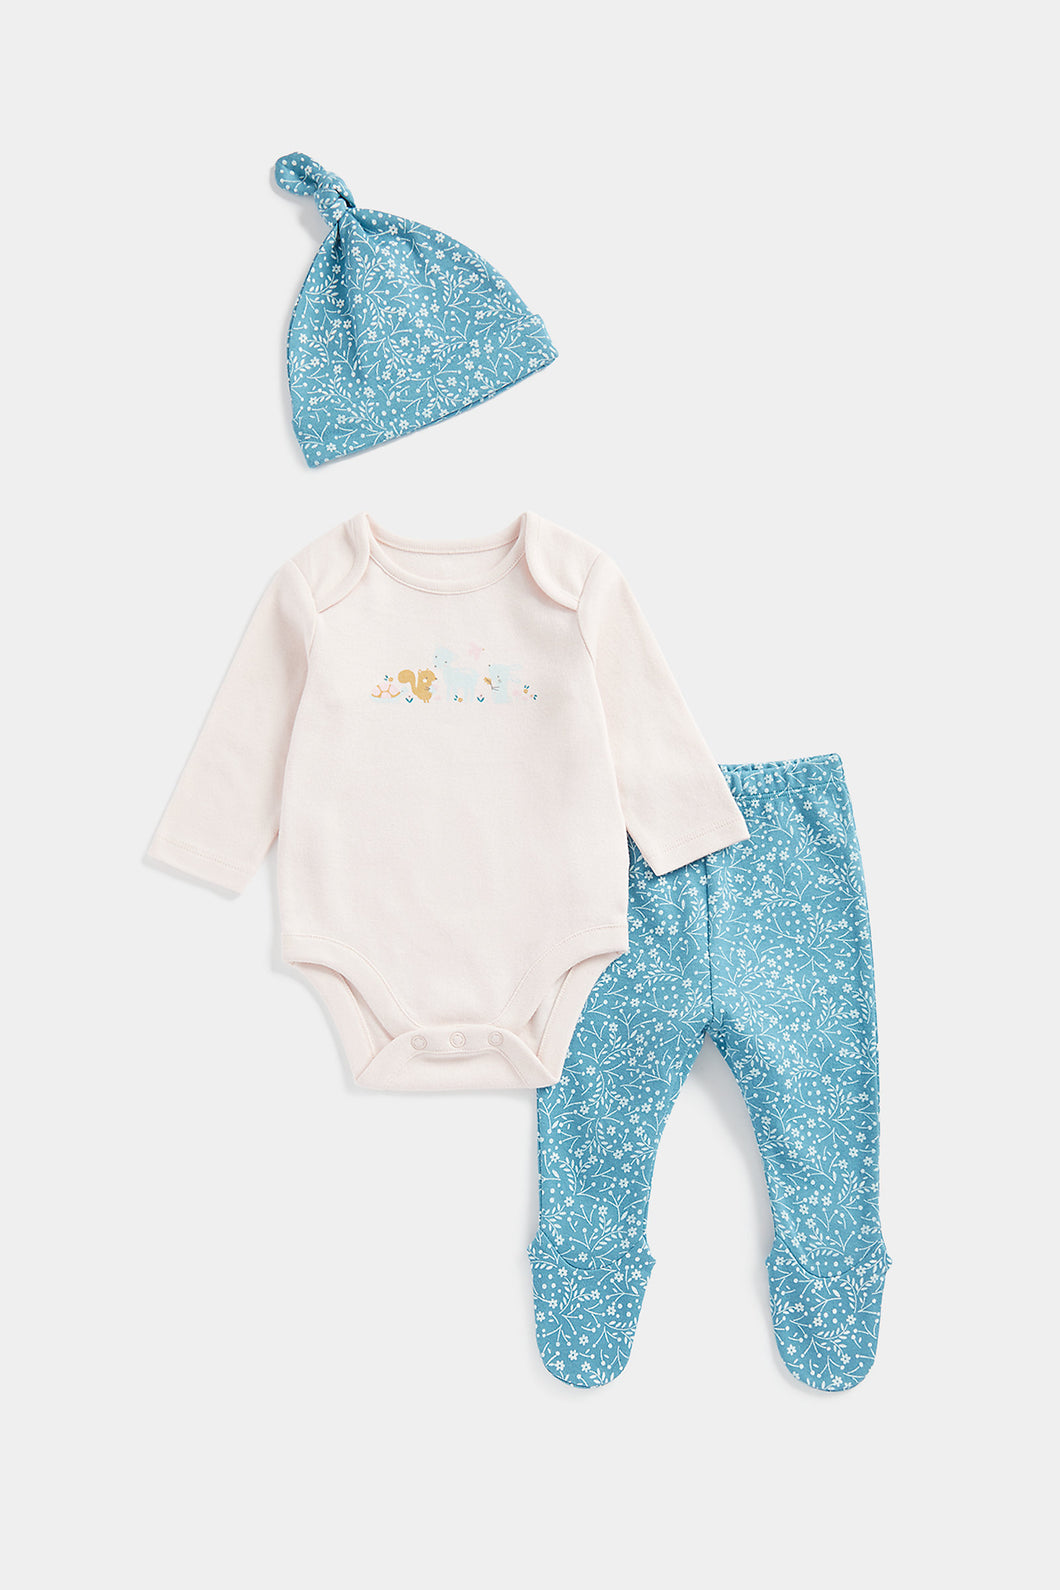 Mothercare Floral 3-Piece Baby Outfit Set